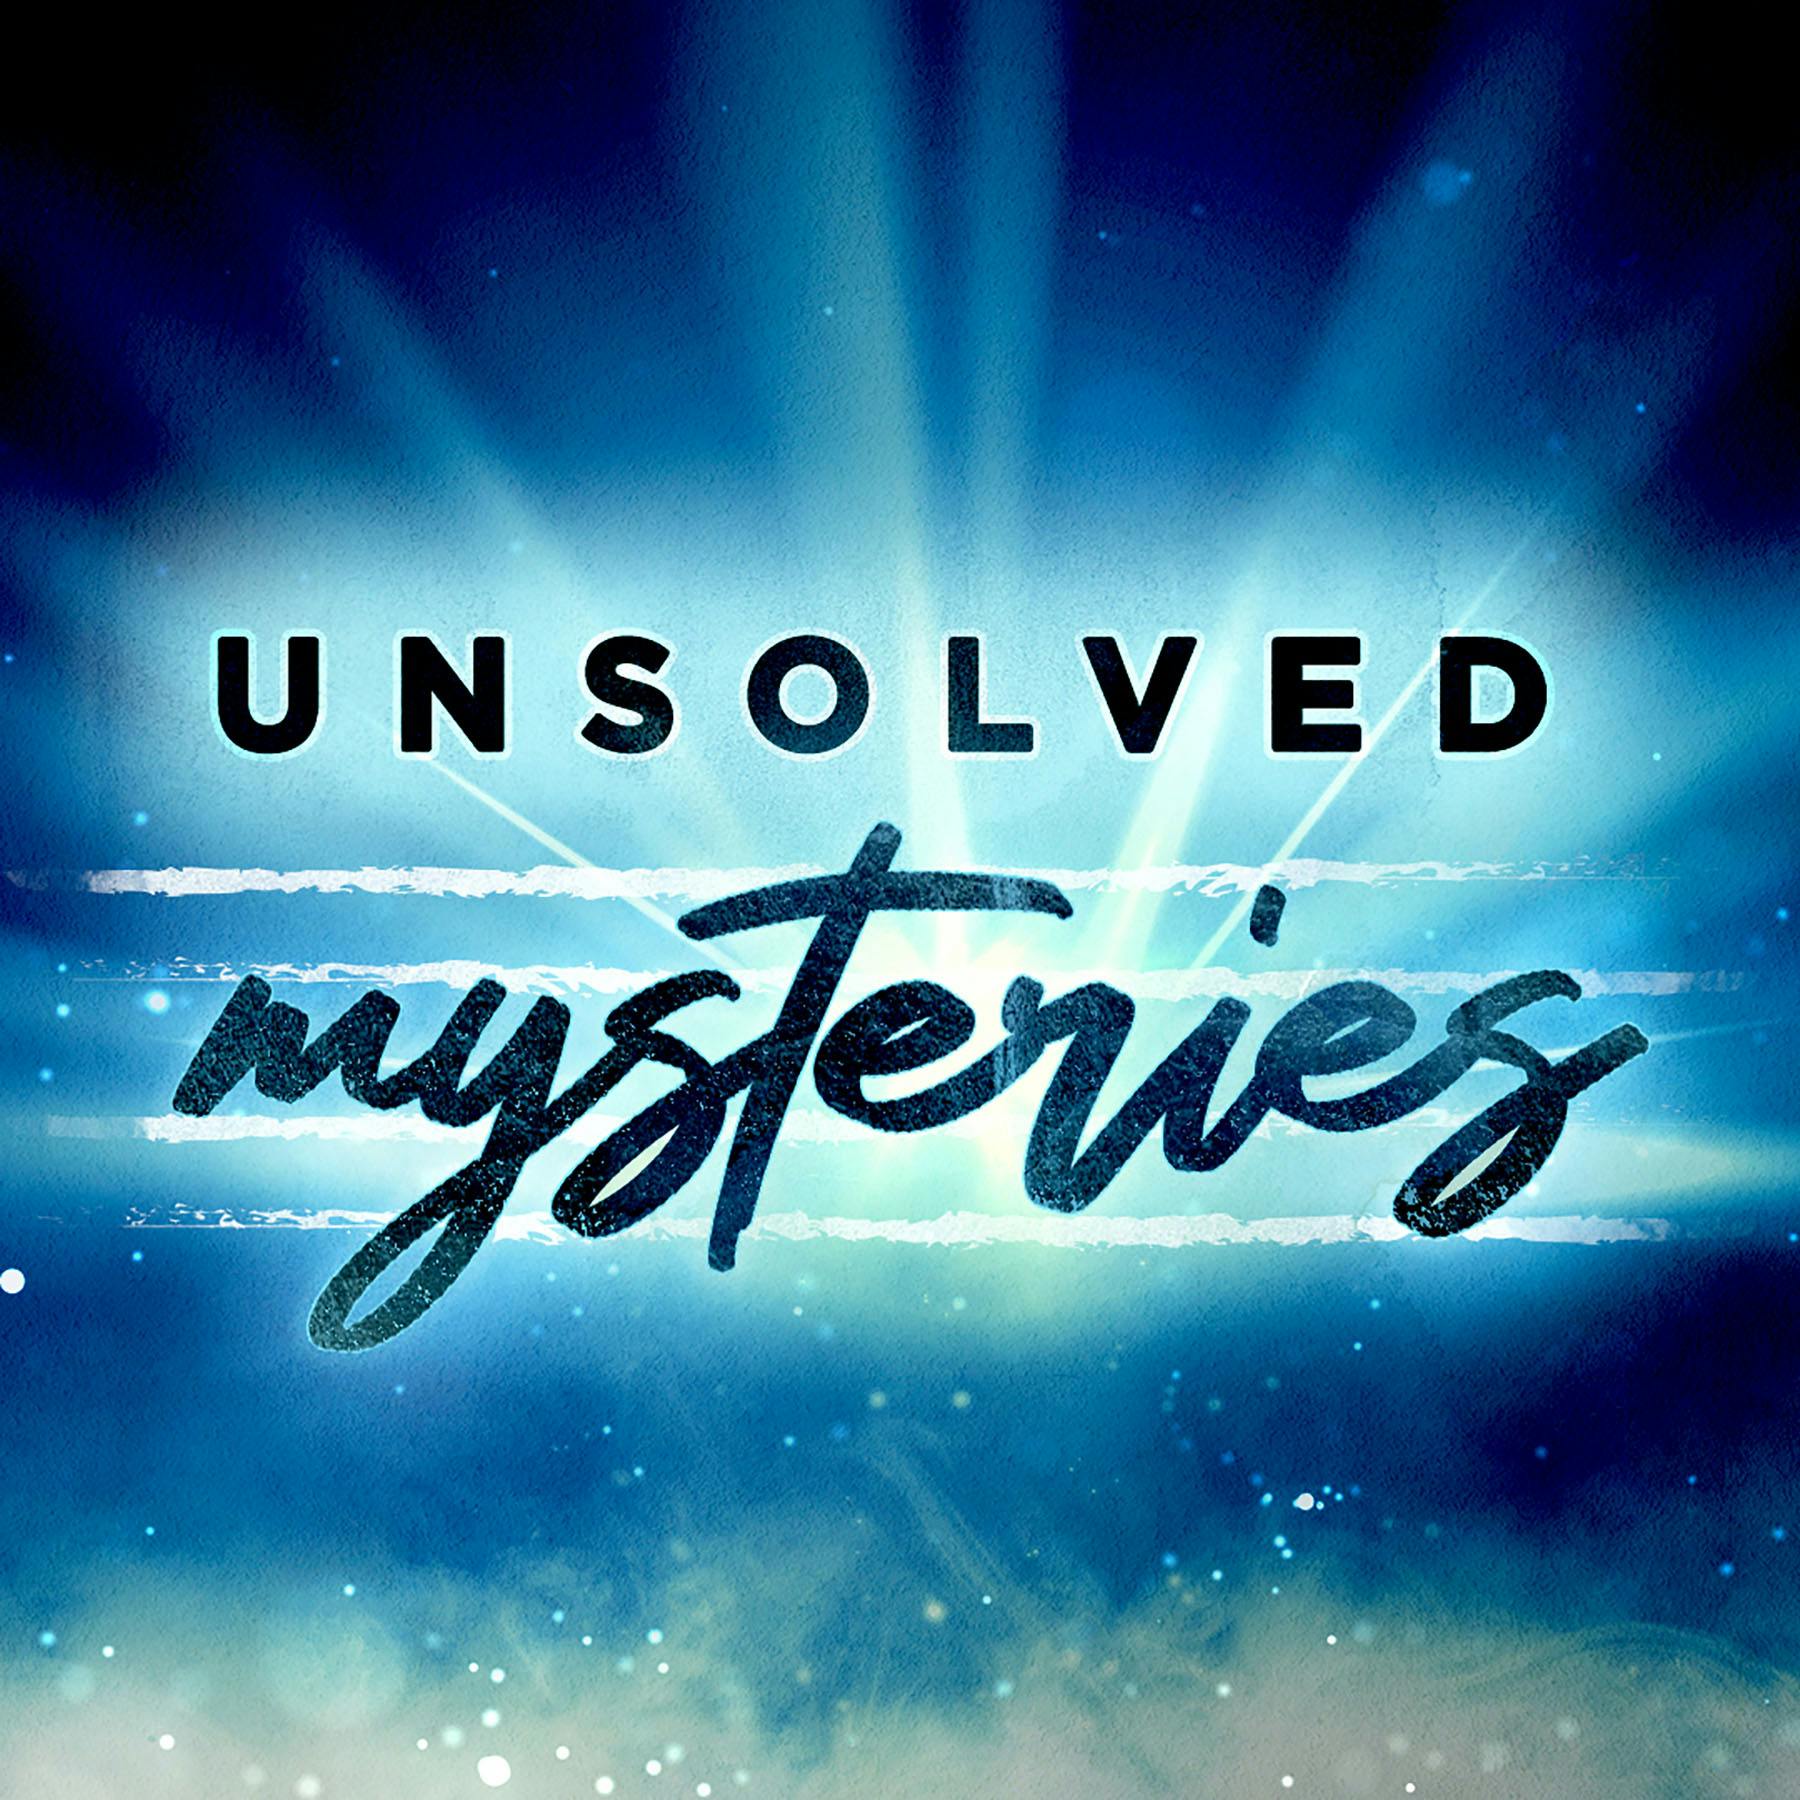 Coming Soon: Unsolved Mysteries Season 2